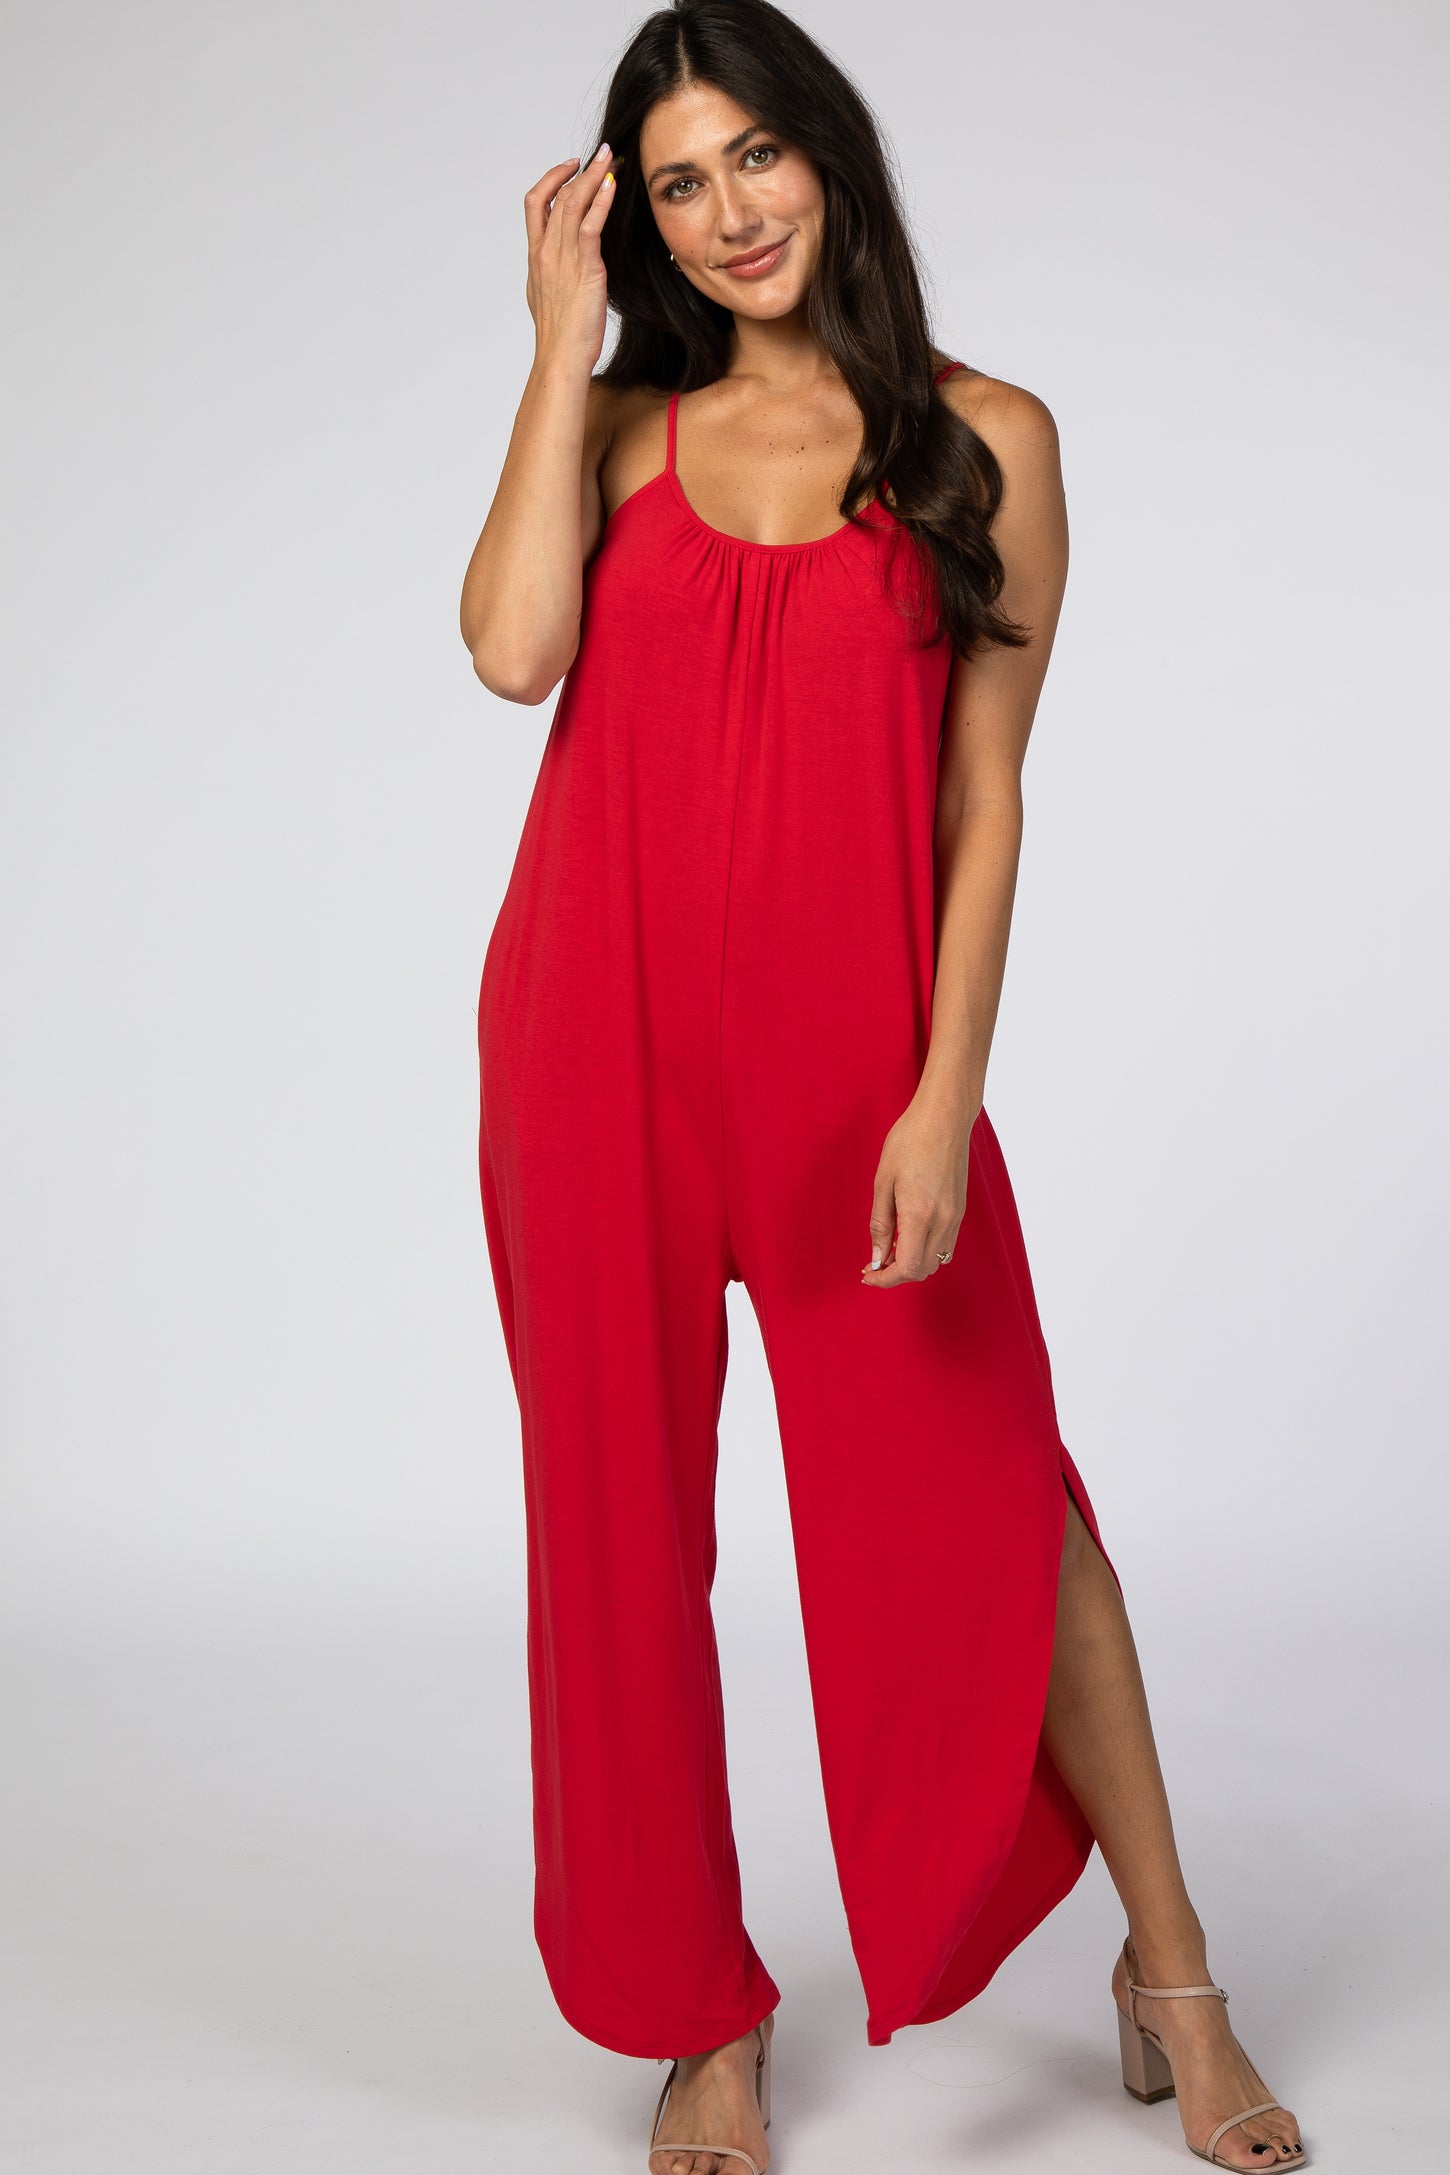 Xihbxyly Jumpsuits for Women, Overalls Women Maternity Jumpsuit Women Loose  Fit Linen Overalls for Women Wide Leg Rompers Cotton Overalls with Pockets  Girls Return Gifts - Walmart.com